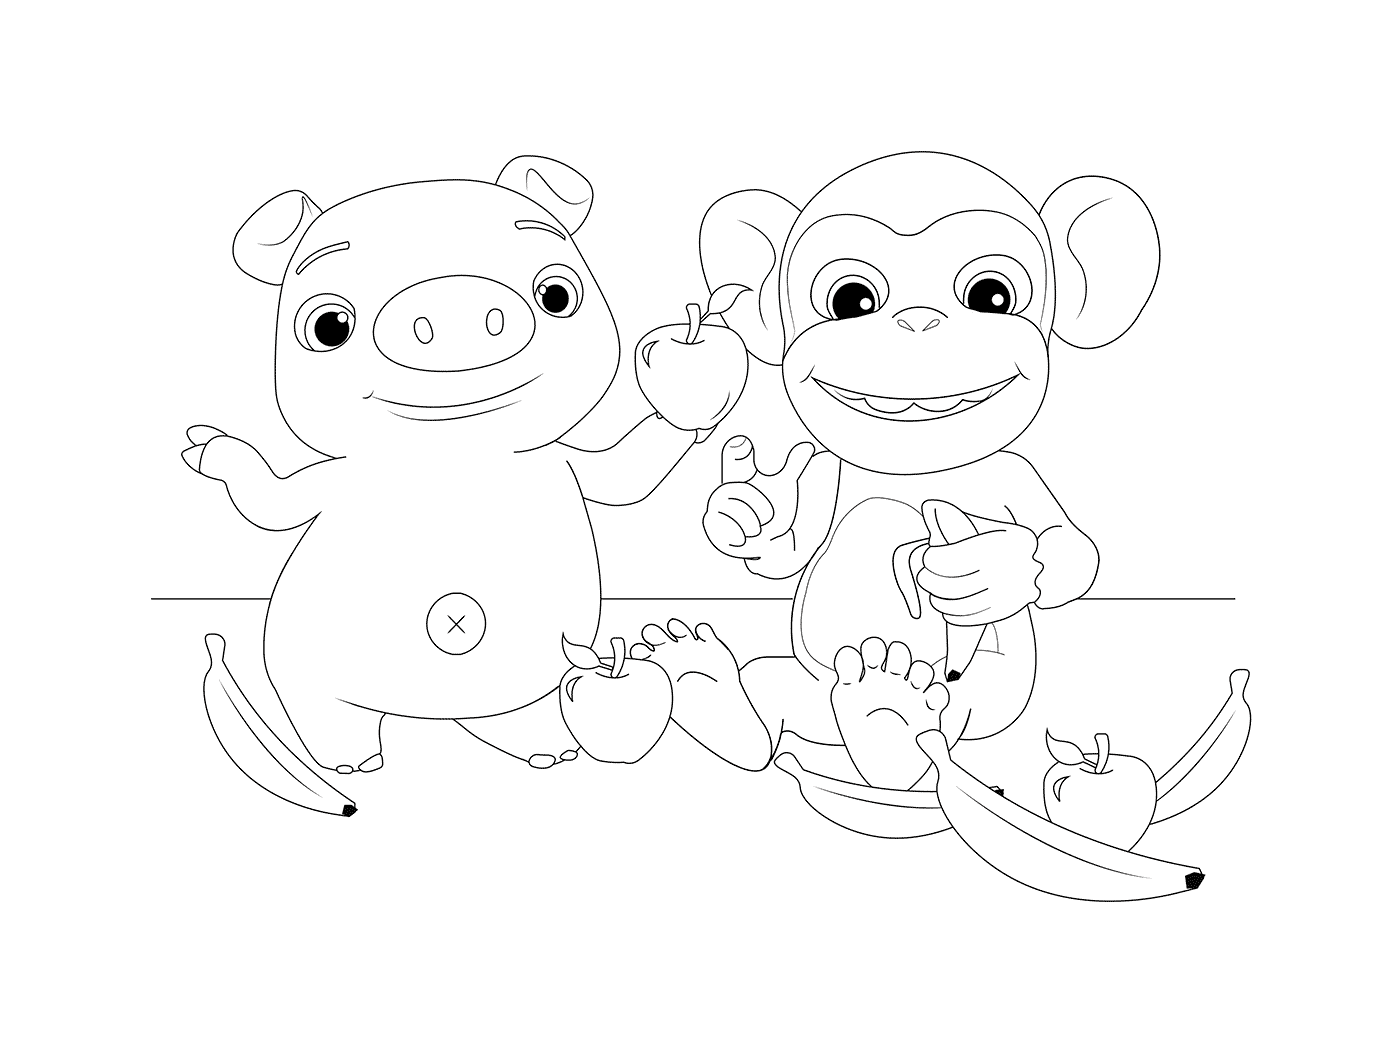  Mochi and Pepe: A monkey and a funny pig 